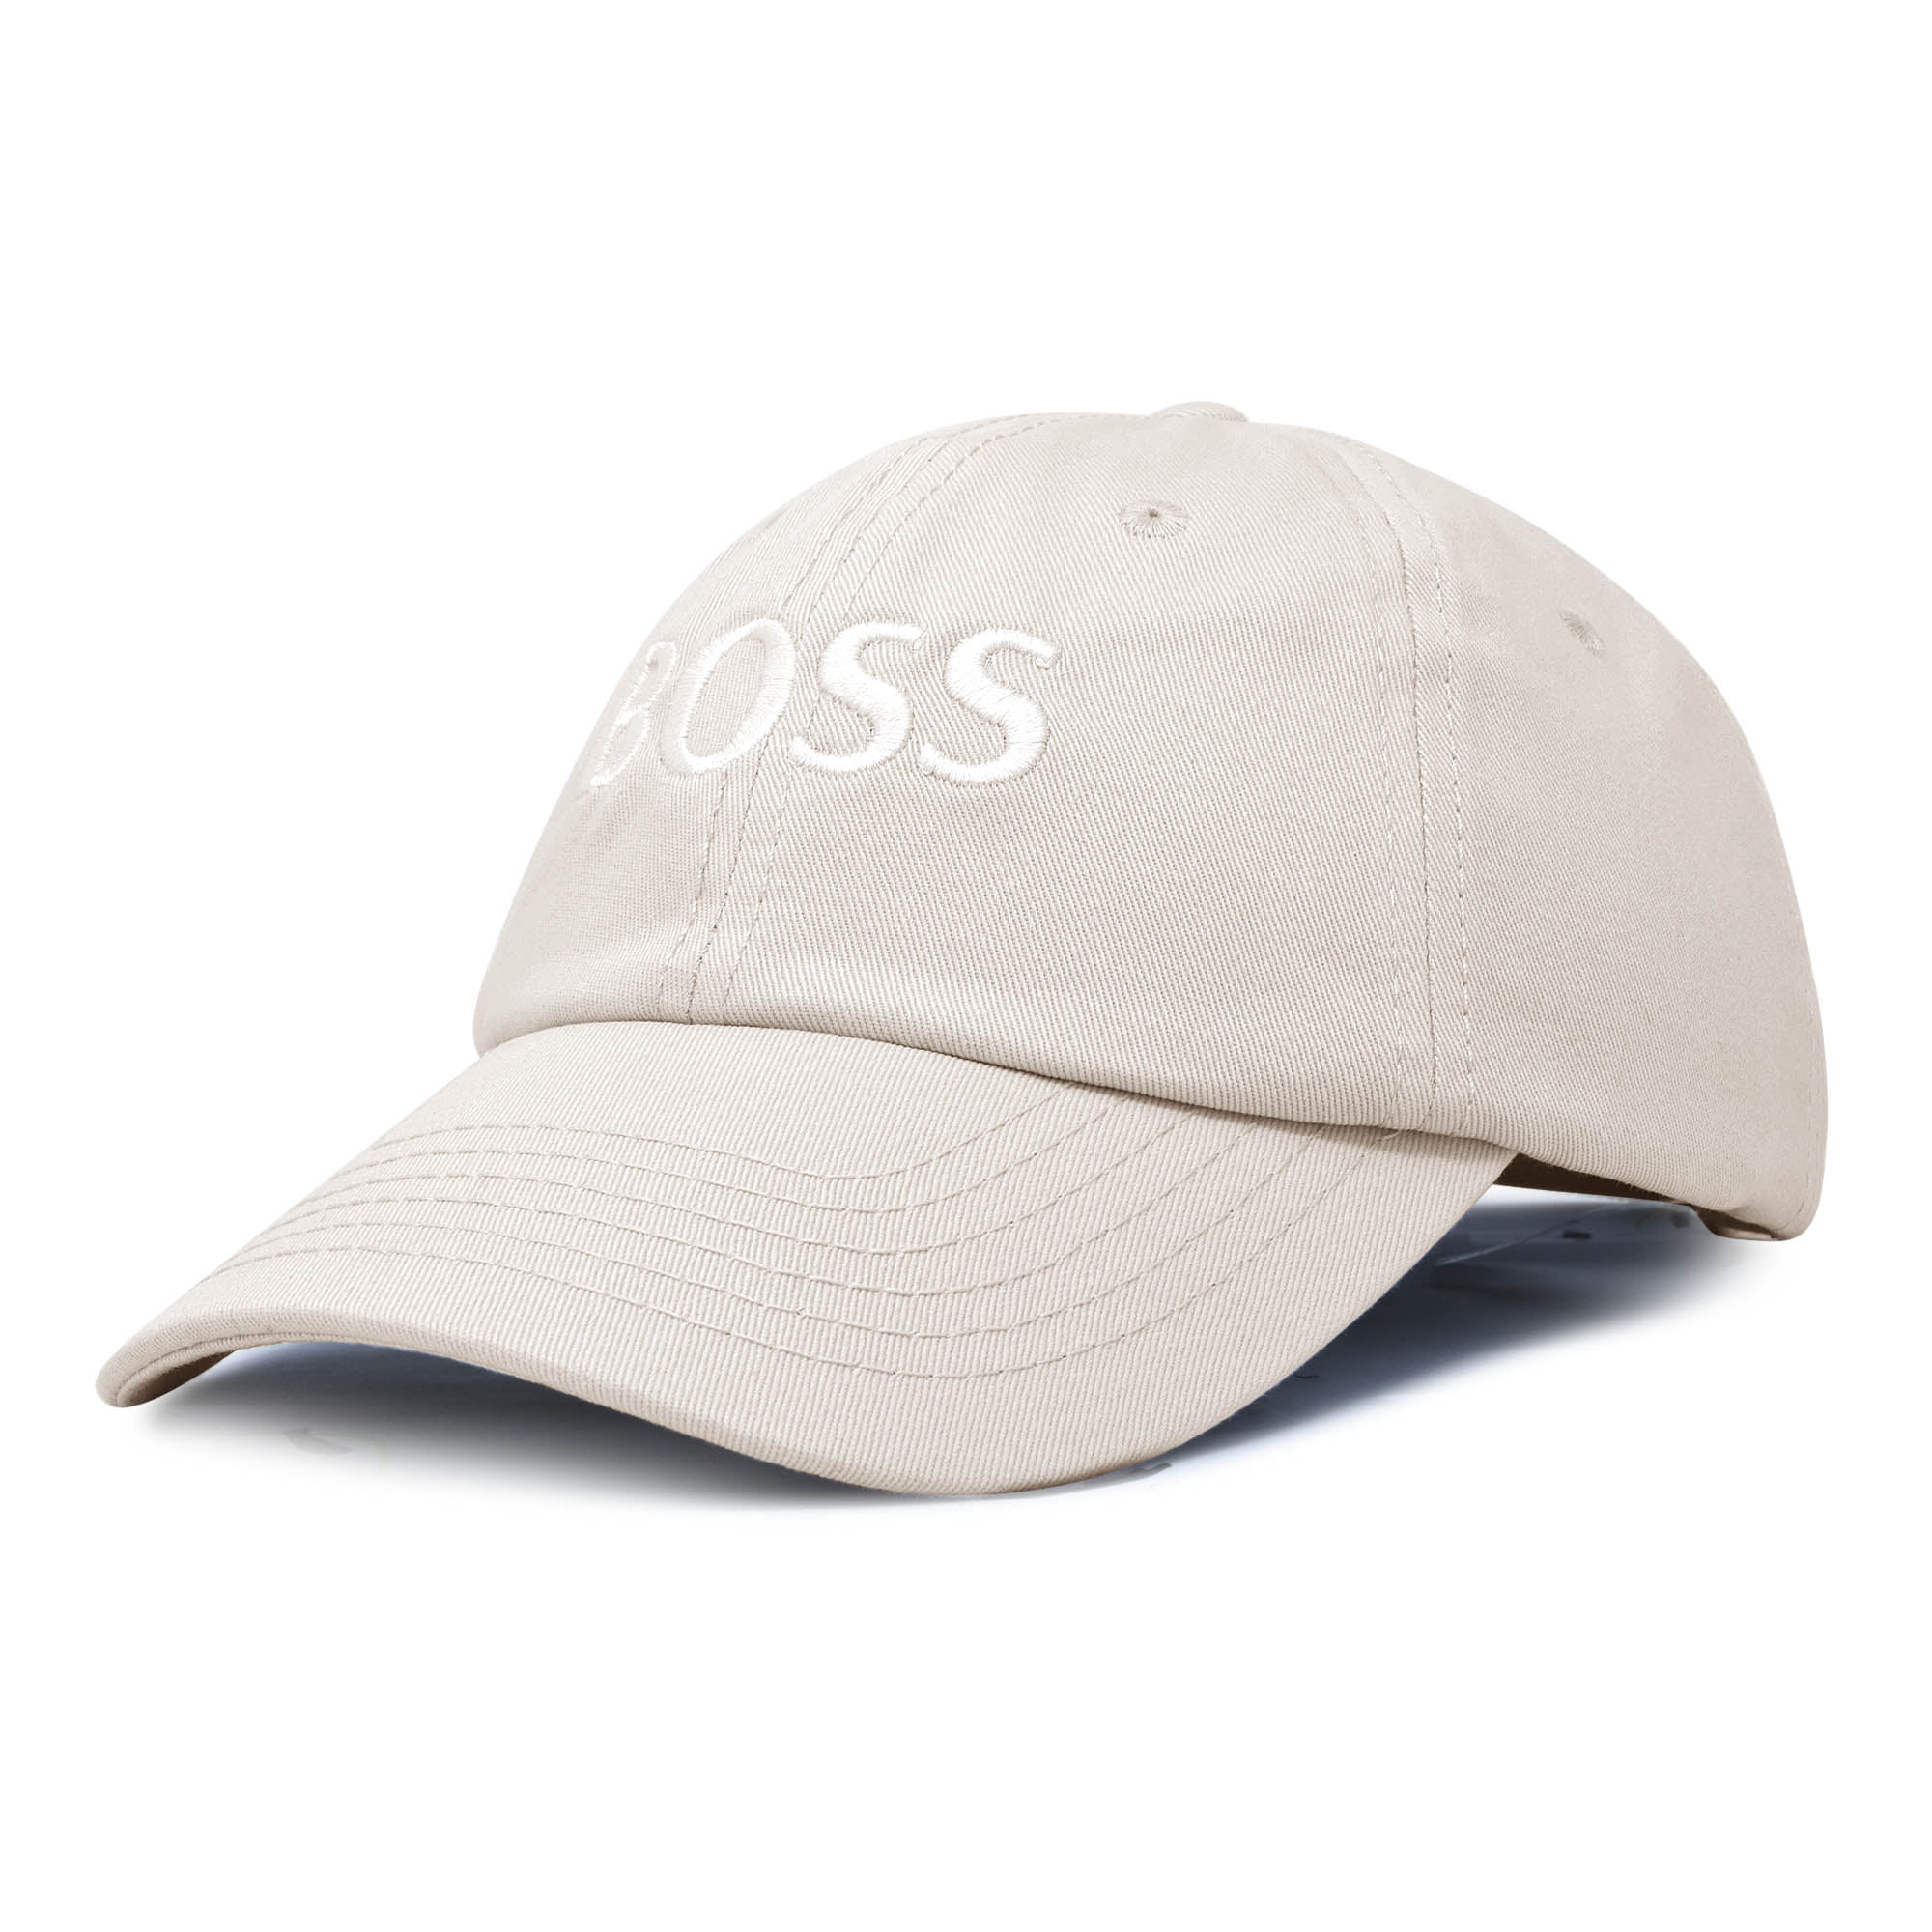 Boss Embroidered SOFT Unstructured Adjustable Hat Cap